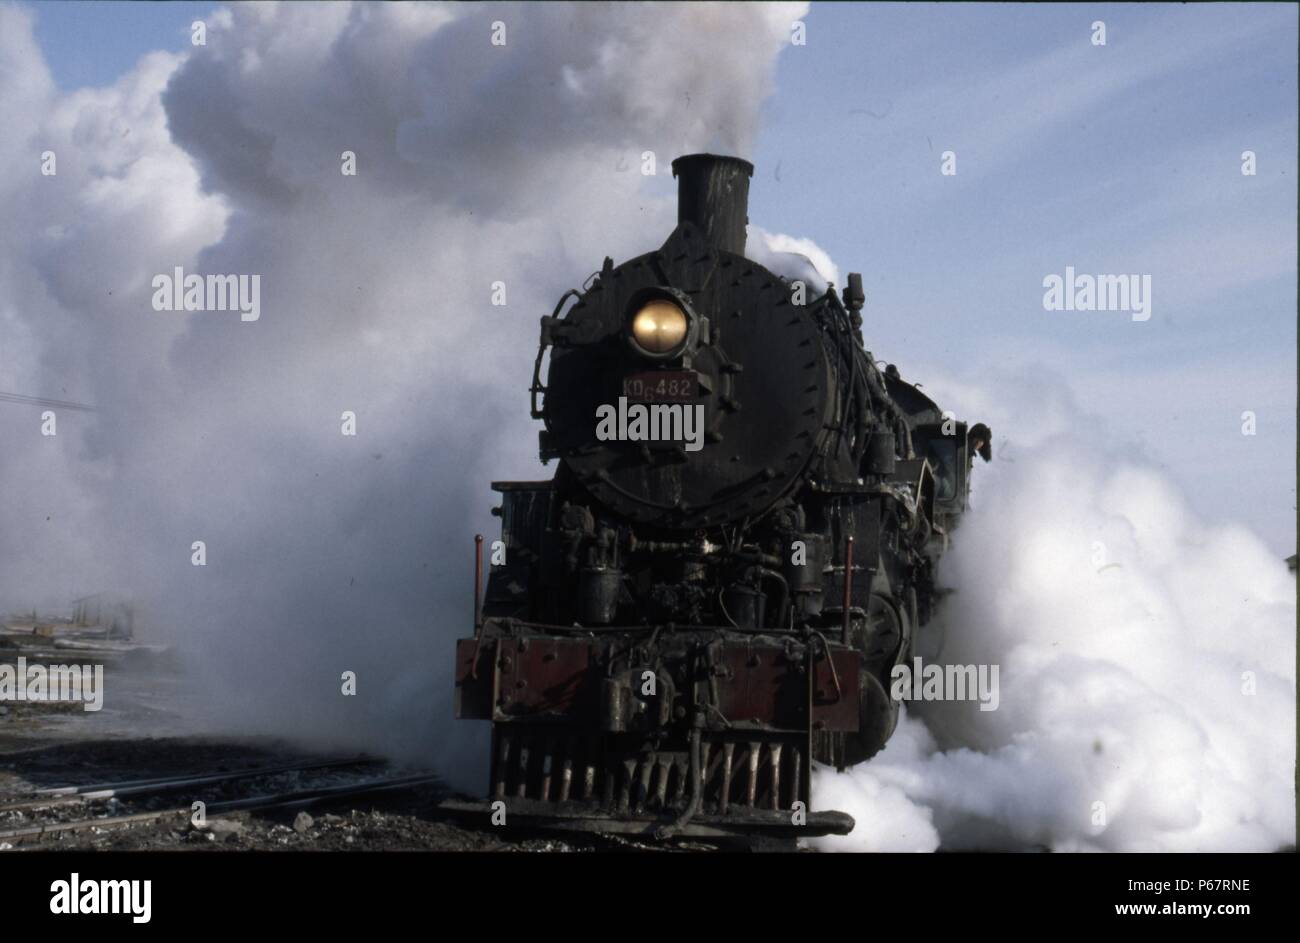 One of the classic United States Army Transportation Corps S160 Class 2-8-0s pensioned off into coalfield service at Manzouli on China's Russian borde Stock Photo